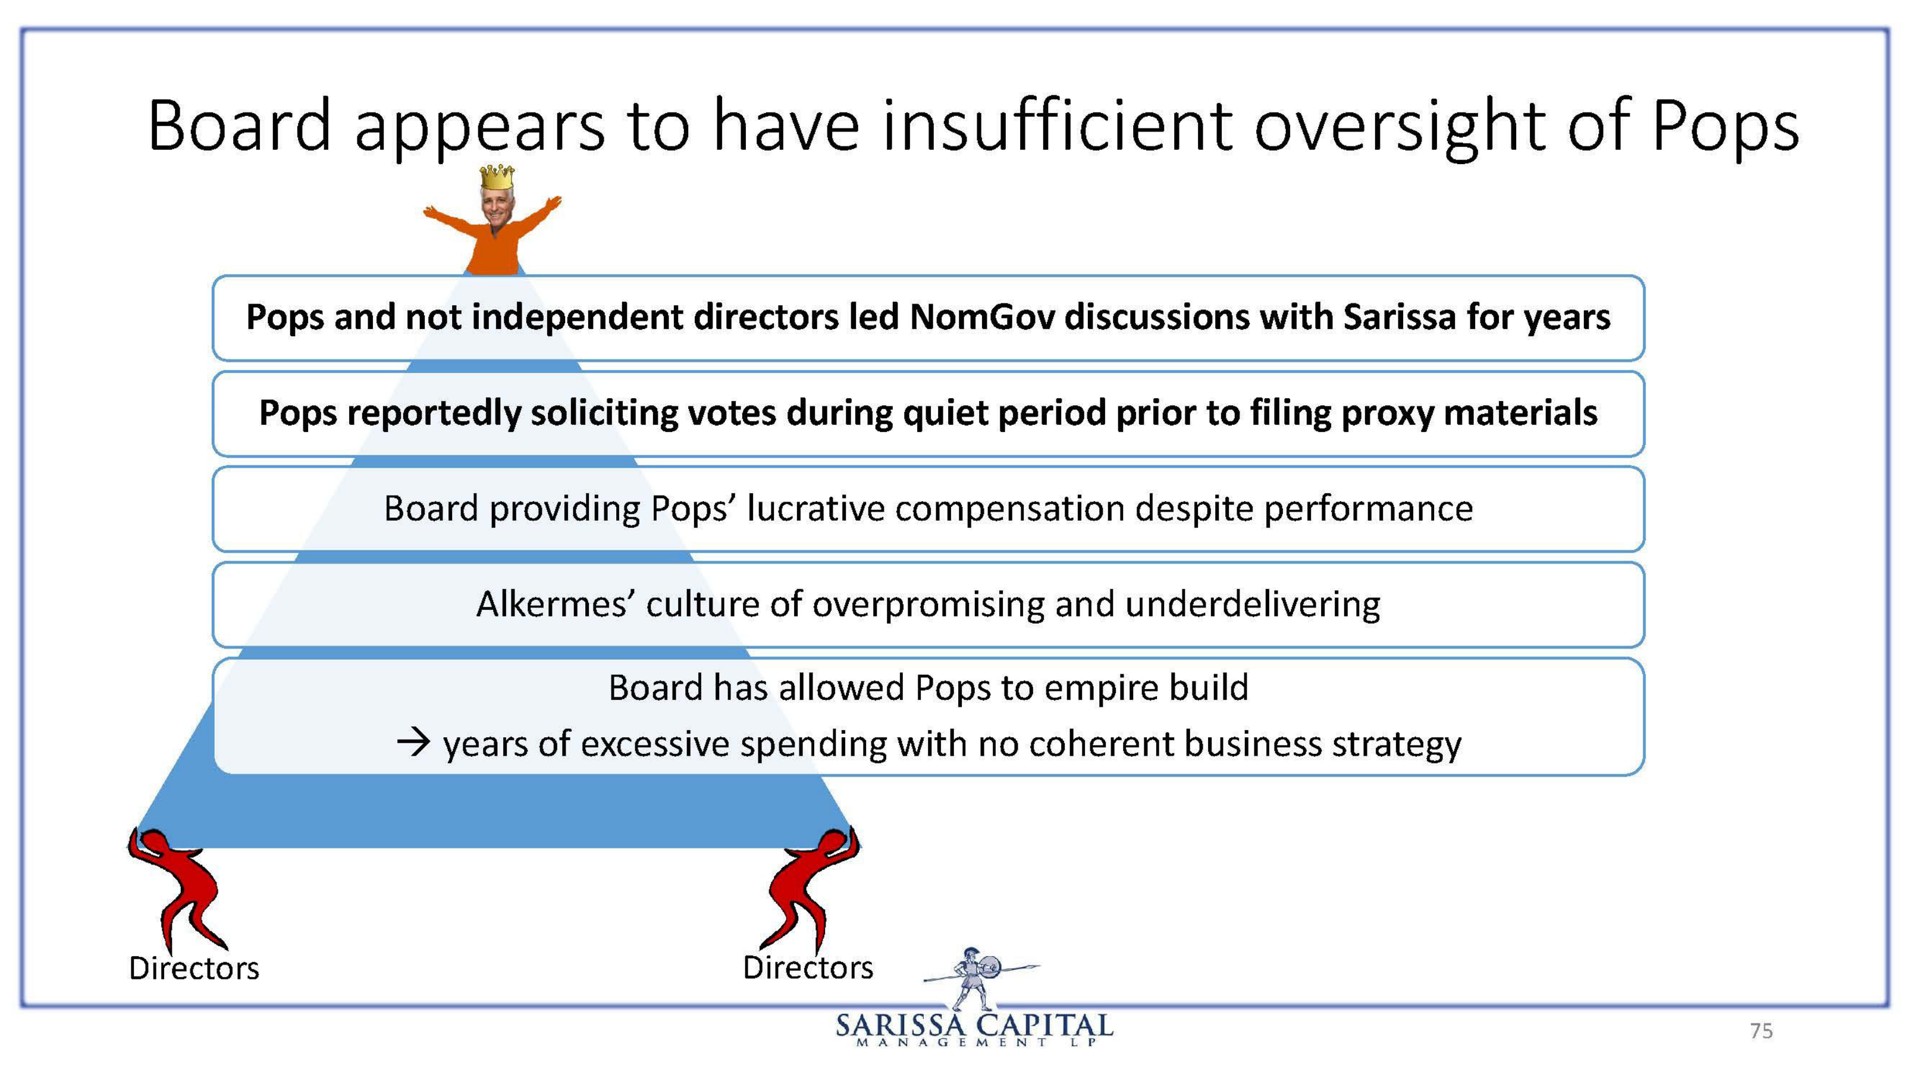 board appears to have insufficient oversight of pops | Sarissa Capital